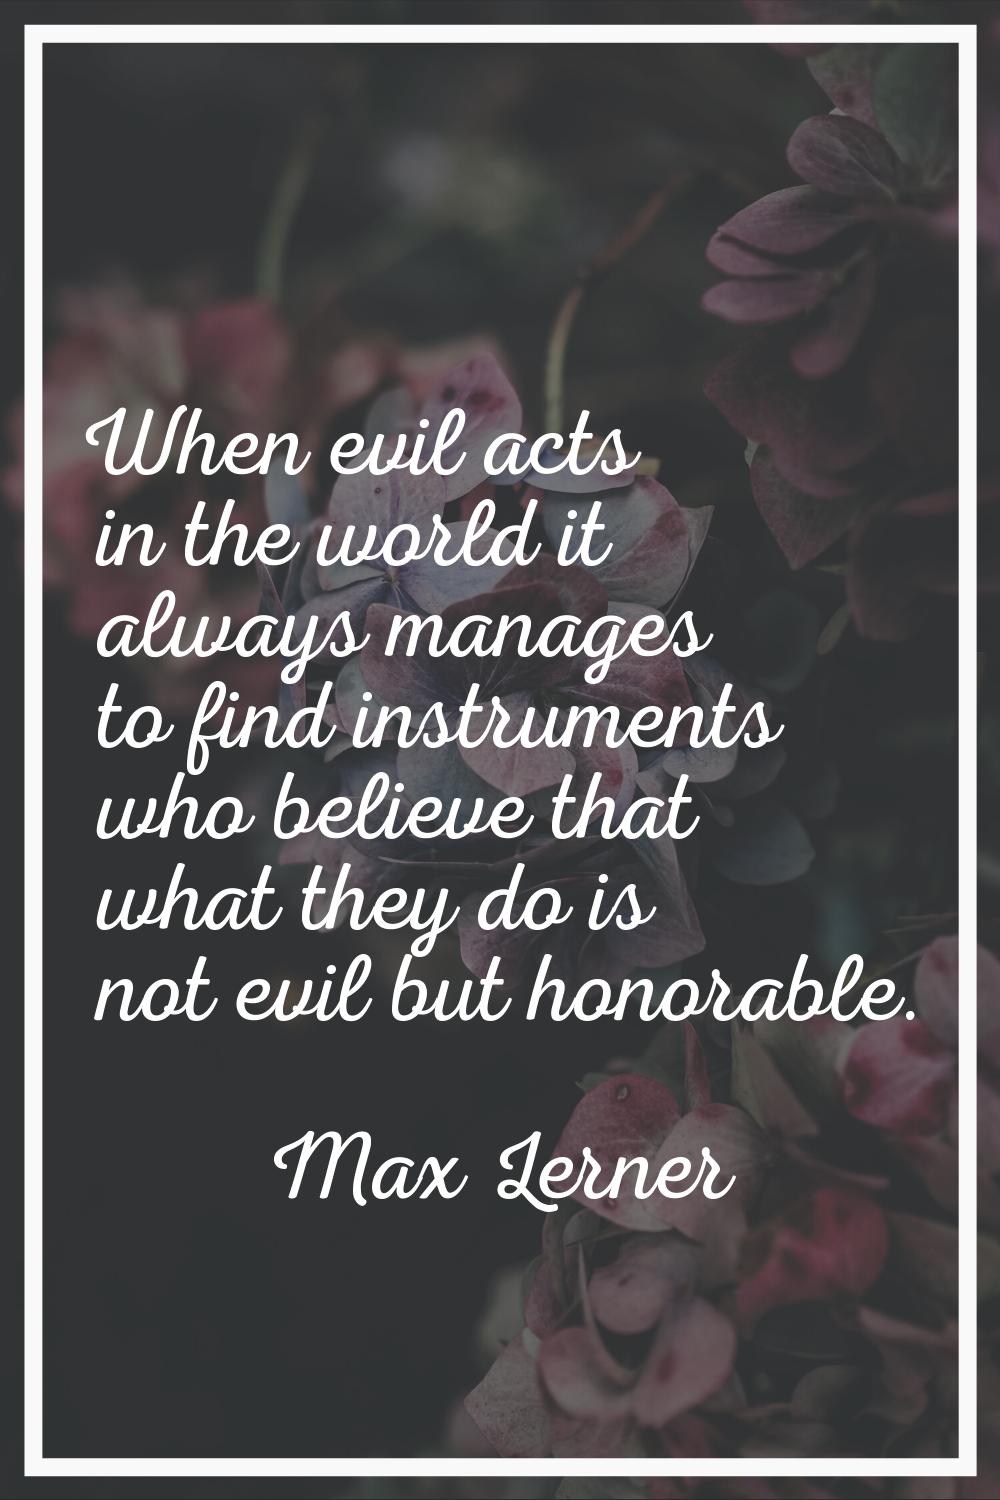 When evil acts in the world it always manages to find instruments who believe that what they do is 